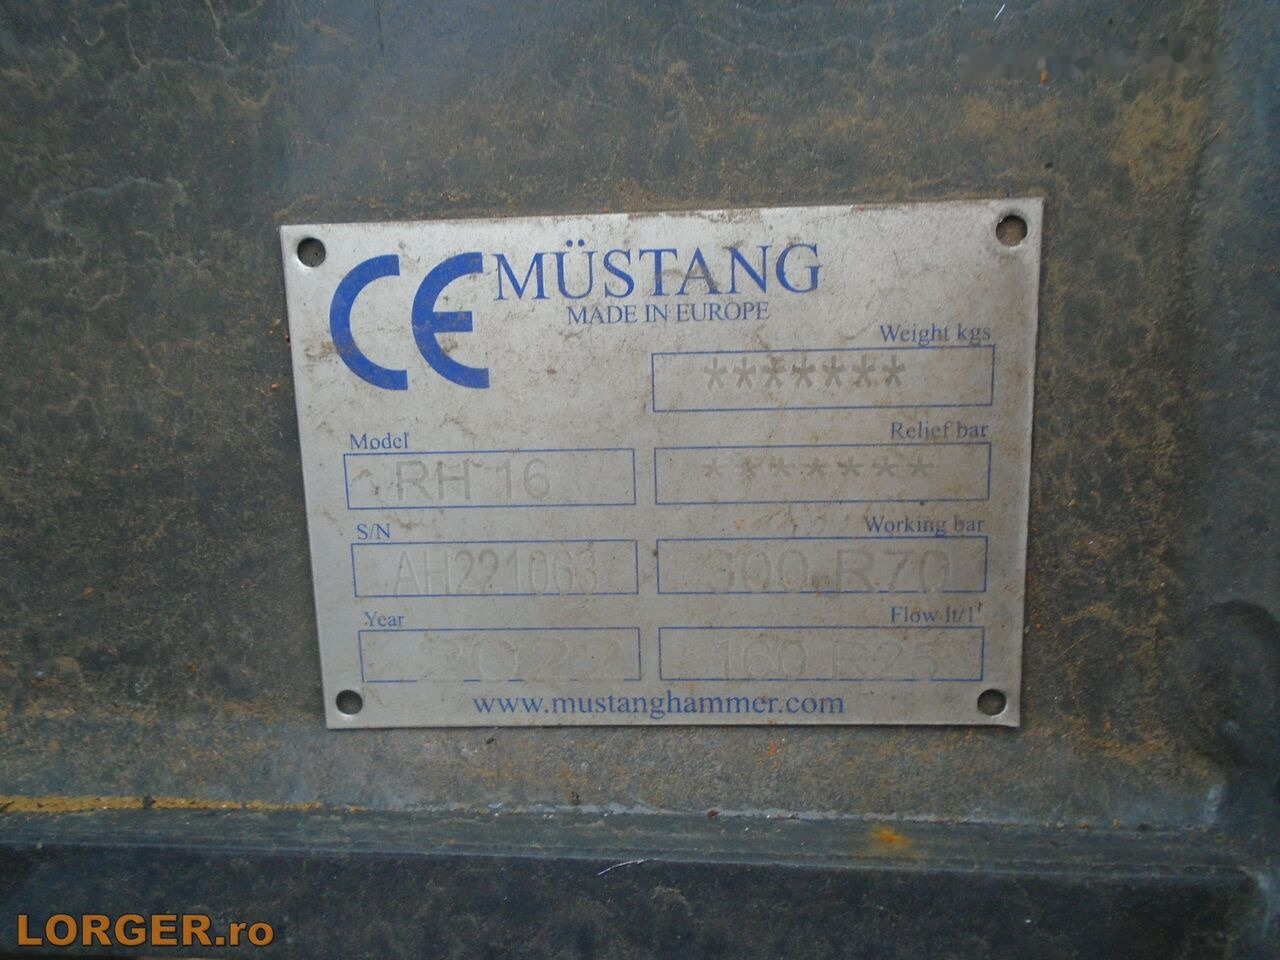 Mustang RH16 - Demolition shears for Construction machinery: picture 5